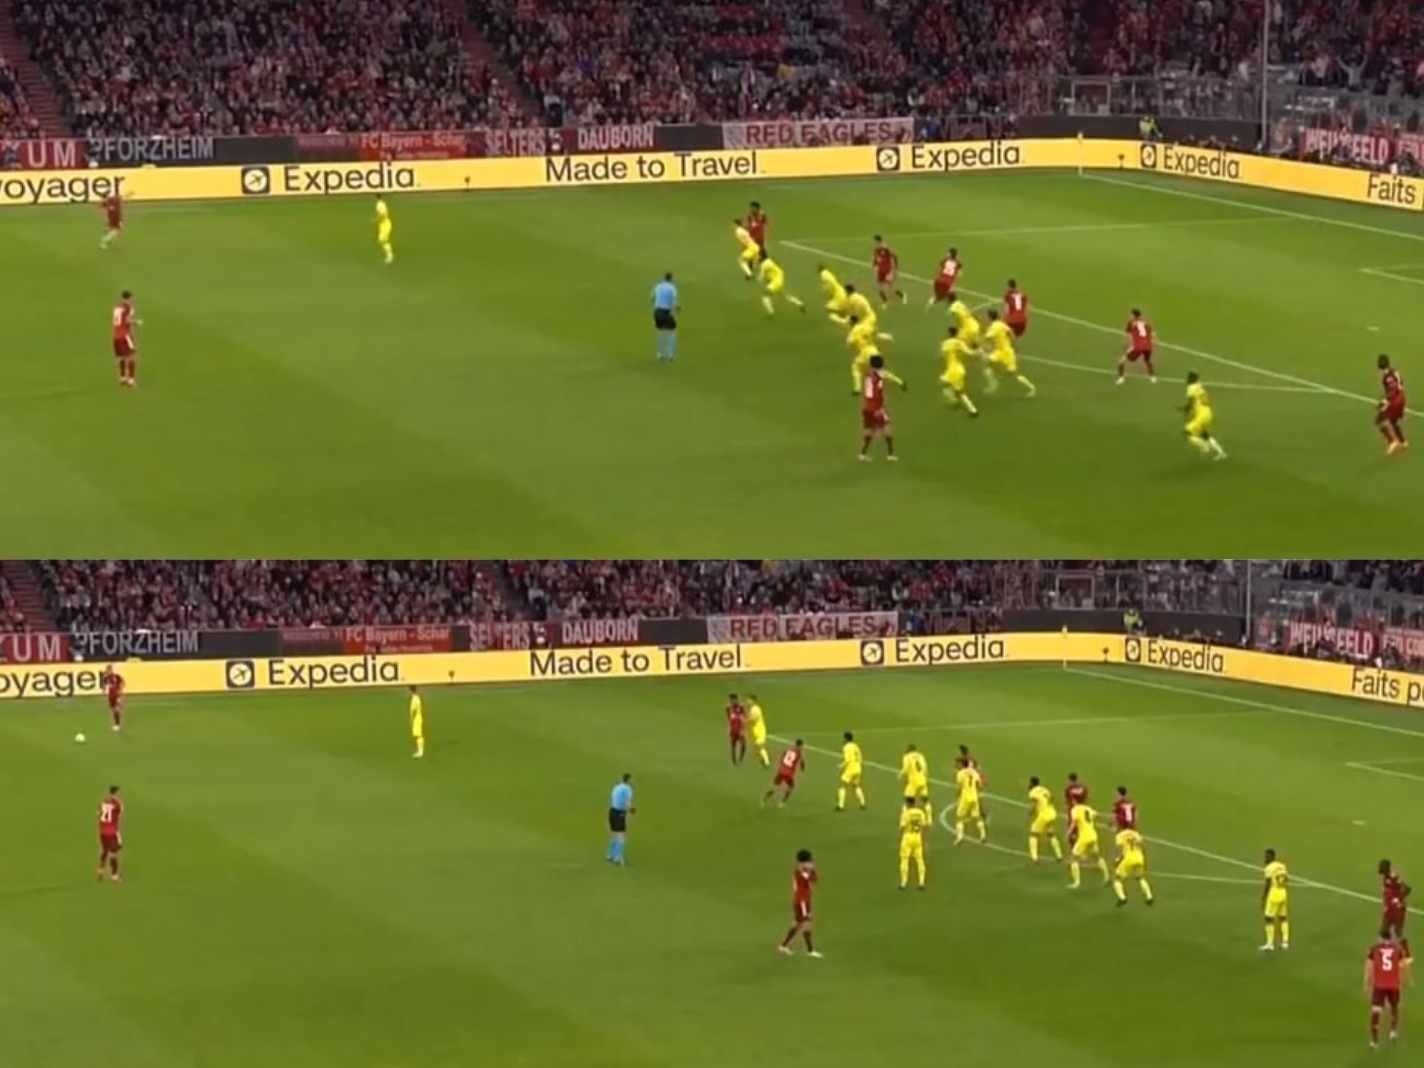 The Offside Trap From Villarreal Against Bayern That Got Everyone Talking